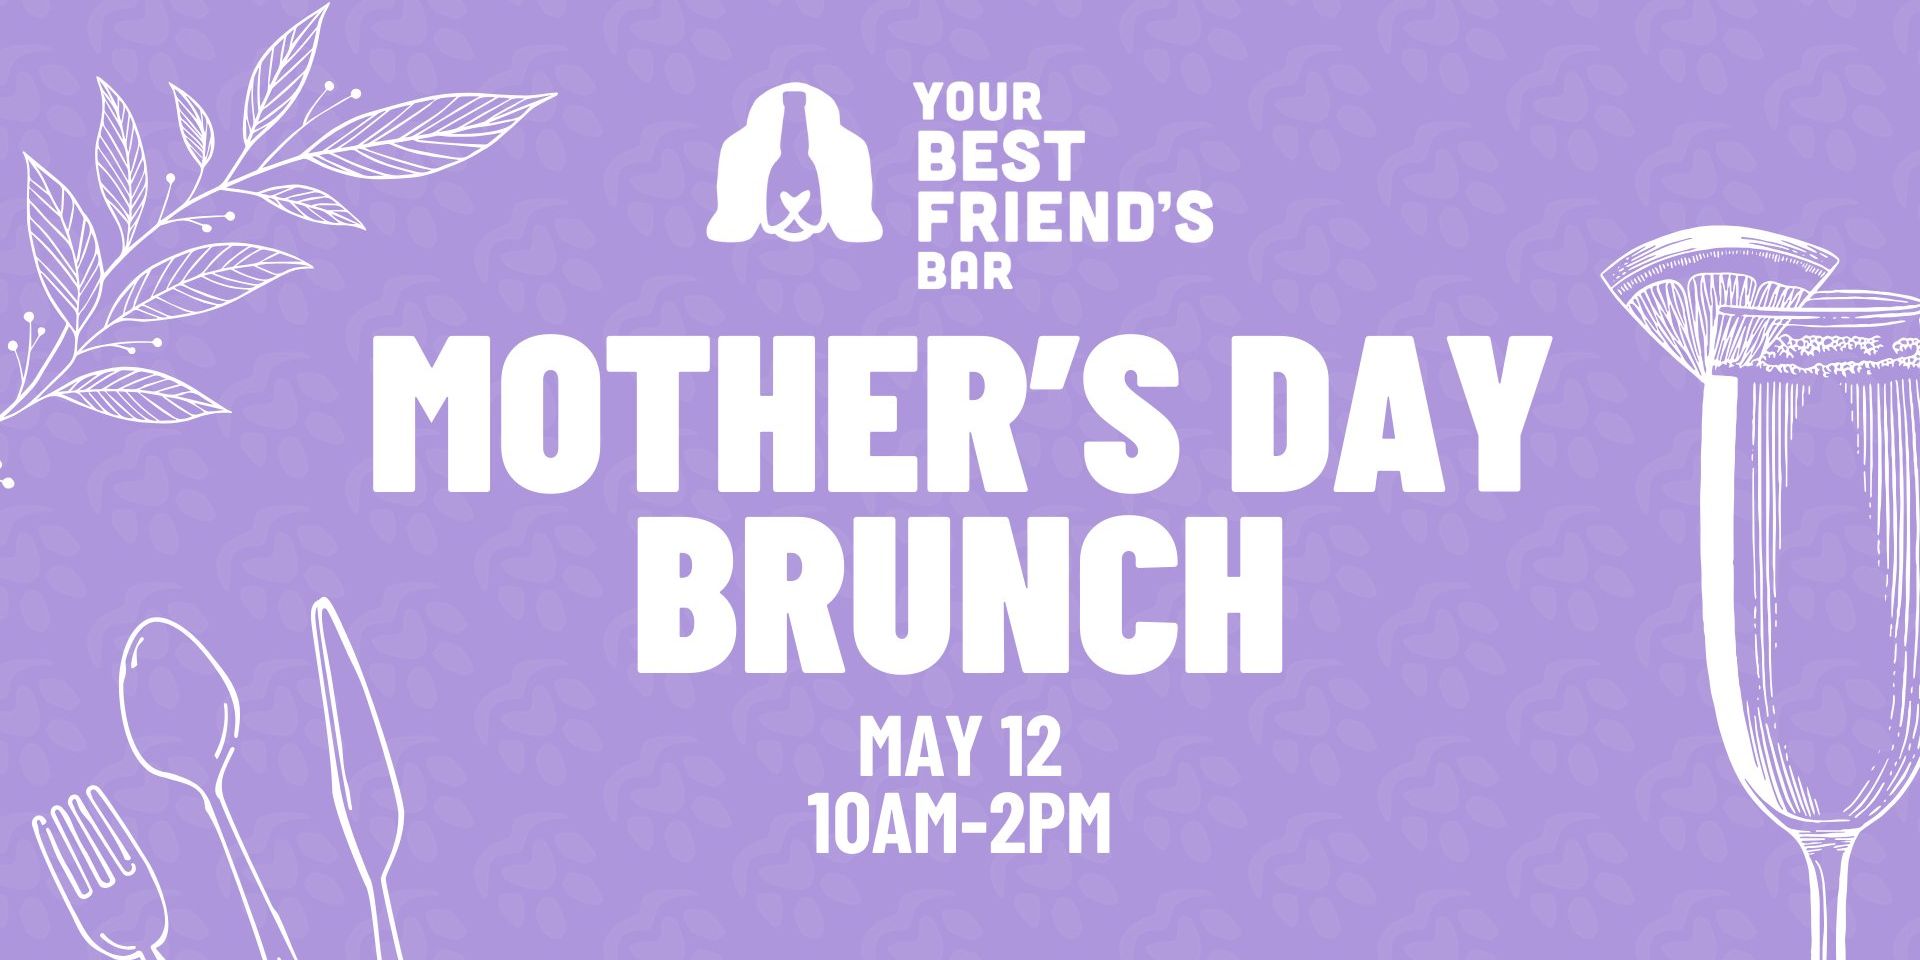 Mother's Day Brunch promotional image